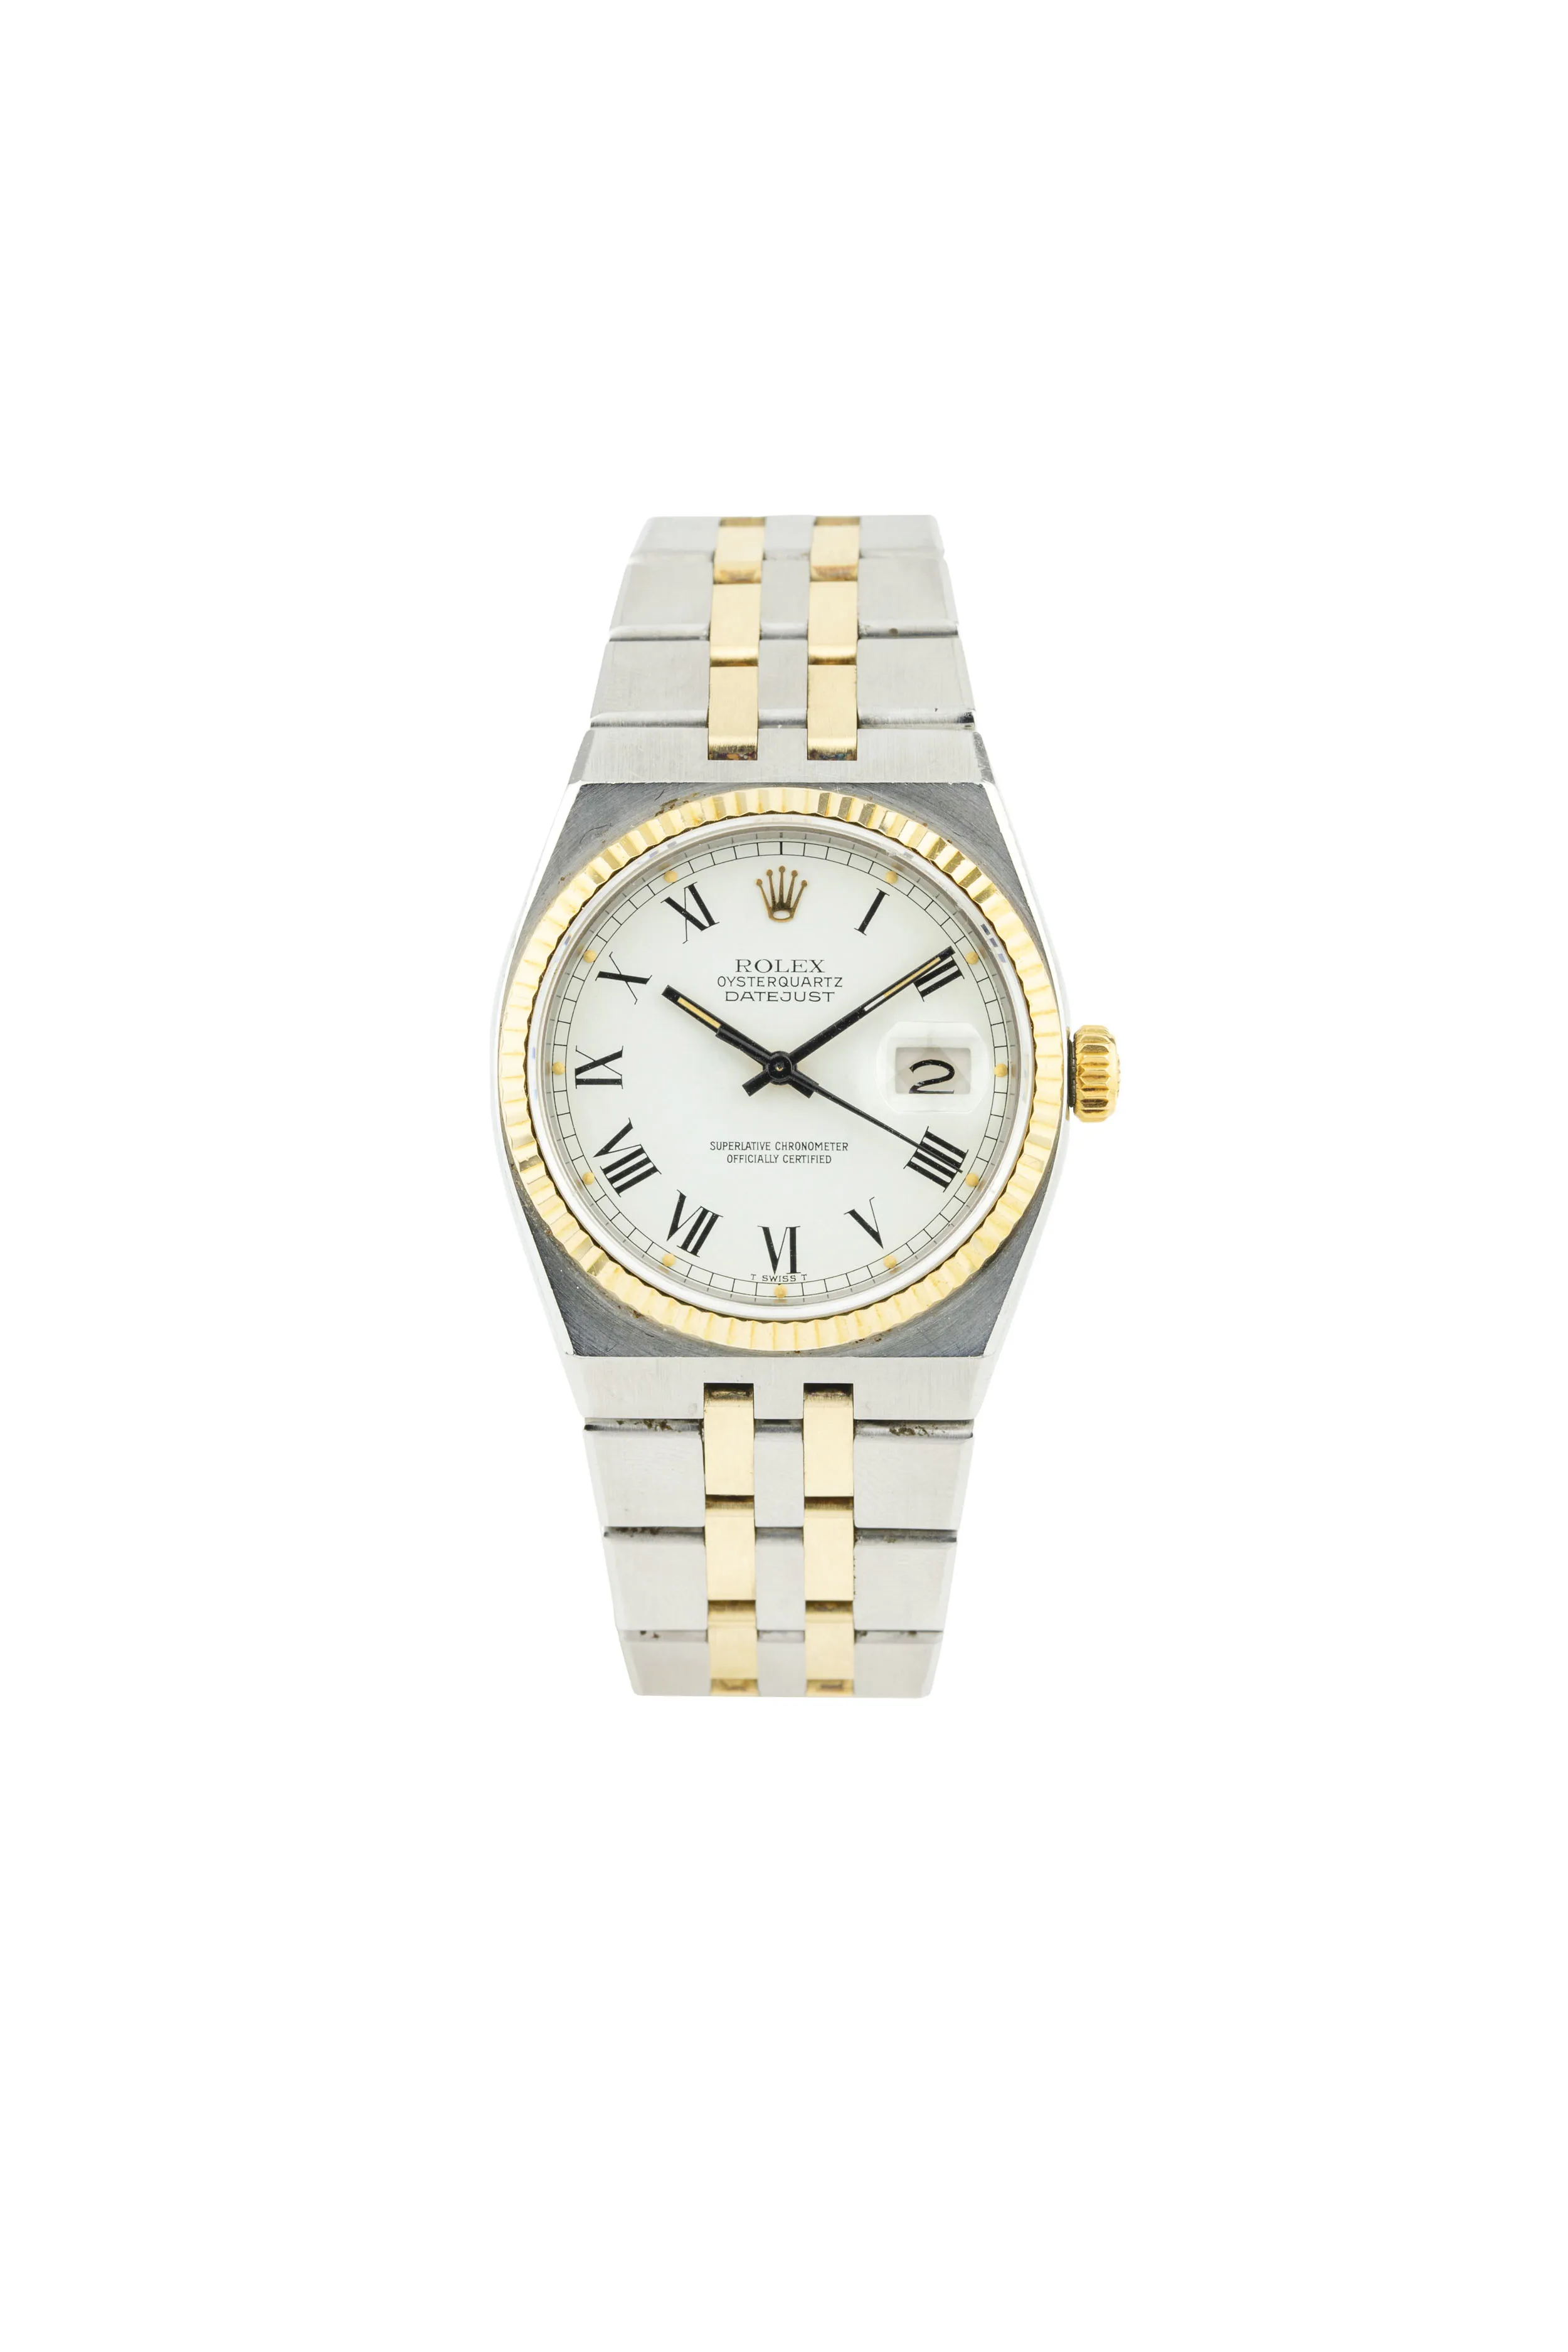 Rolex Datejust Oysterquartz 17013 34mm Stainless steel and gold